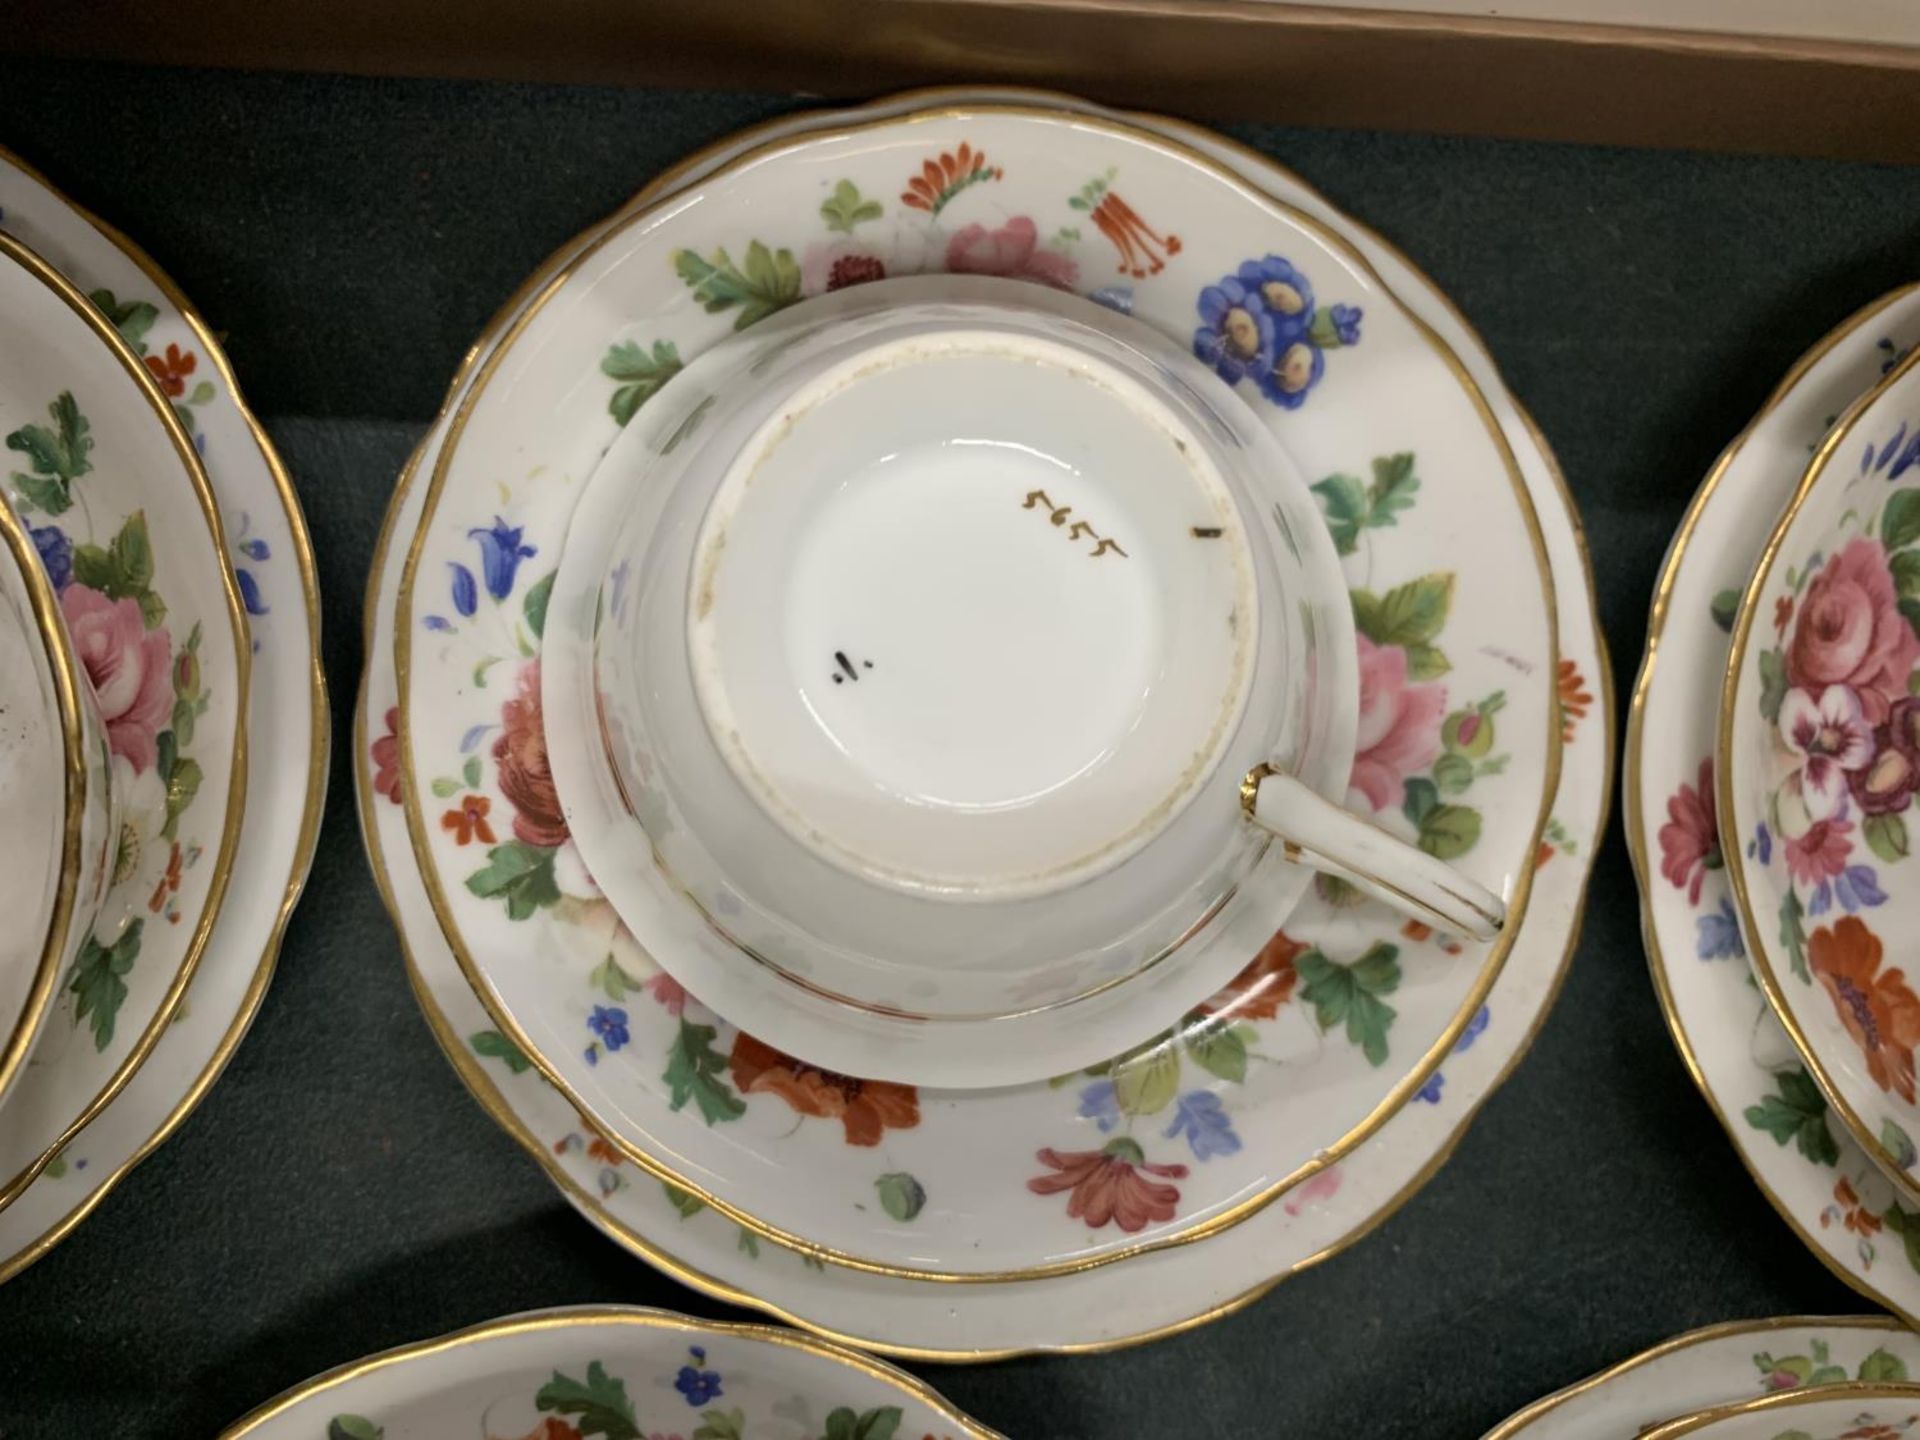 A VINTAGE FLORAL PATTERNED PART TEASET TO INCLUDE CAKE PLATES, CREAM JUG, SUGAR BOWL, CUPS, - Image 2 of 4